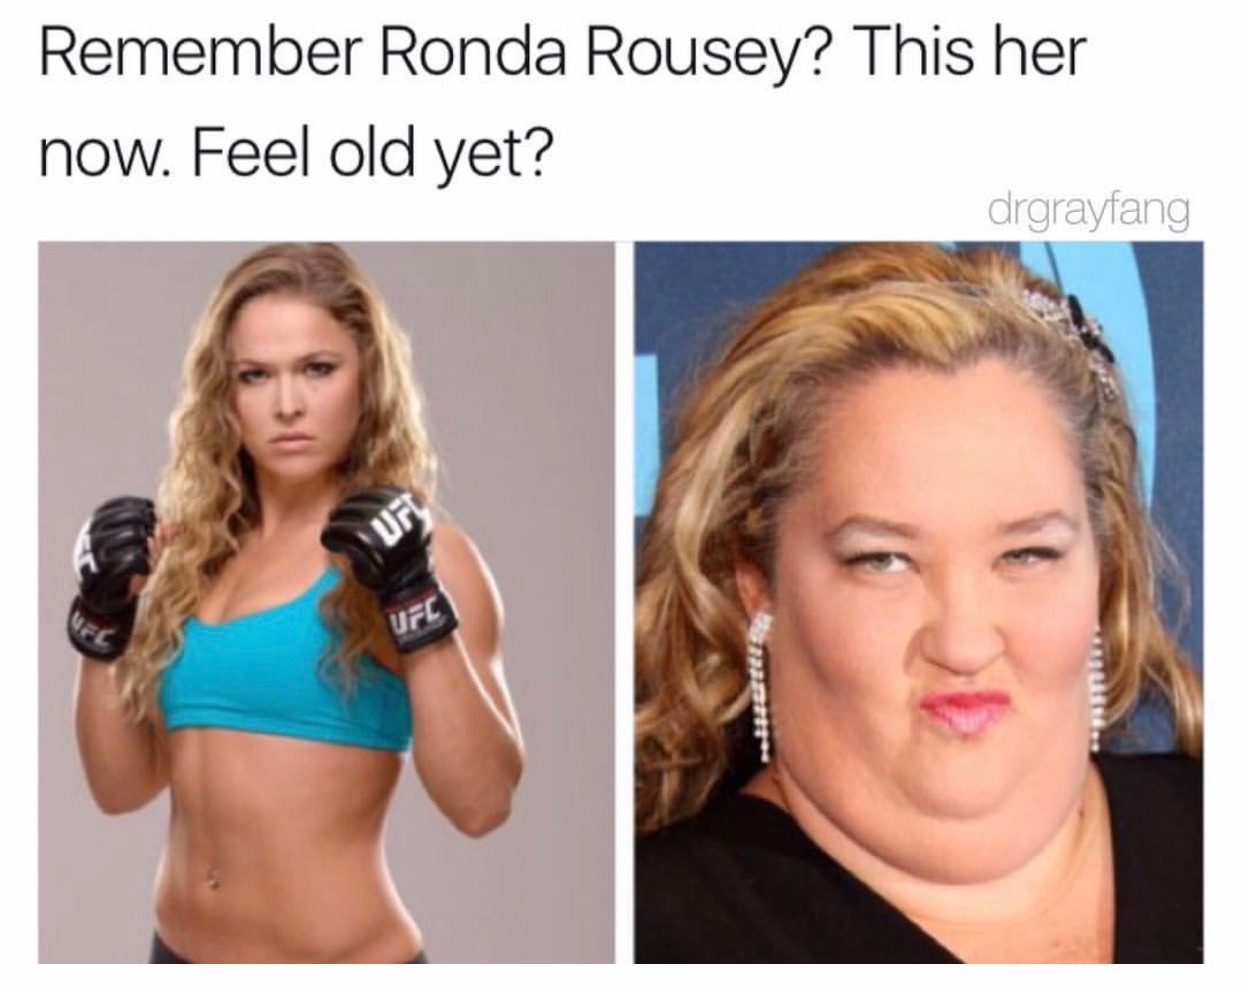 memes - ronda rousey - Remember Ronda Rousey? This her now. Feel old yet? drgrayfang